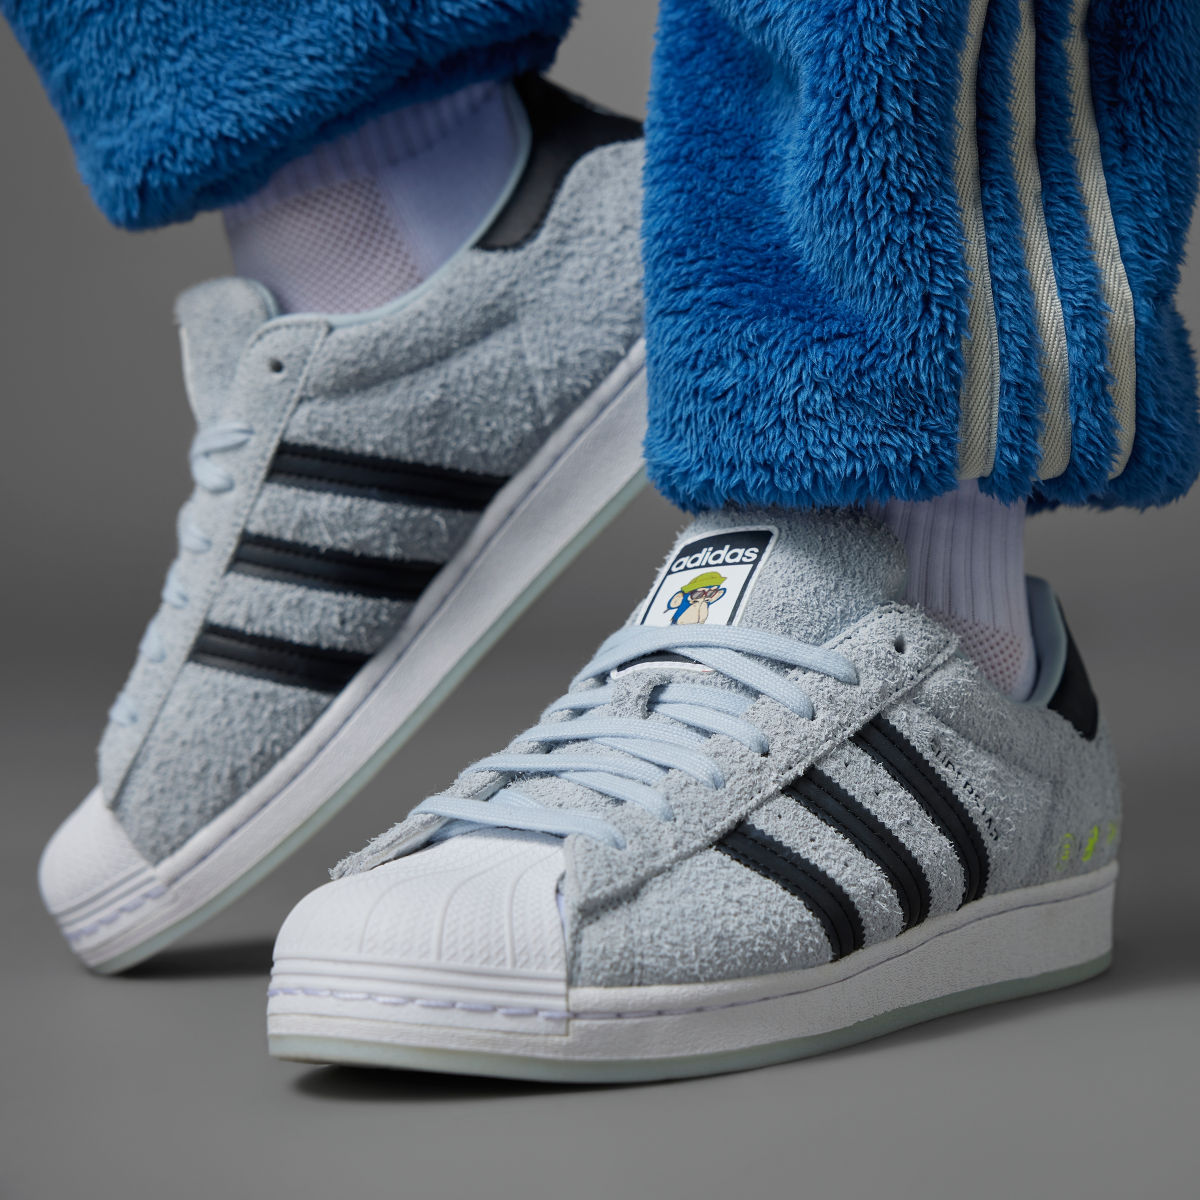 Adidas Into the Metaverse Superstar Shoes. 8